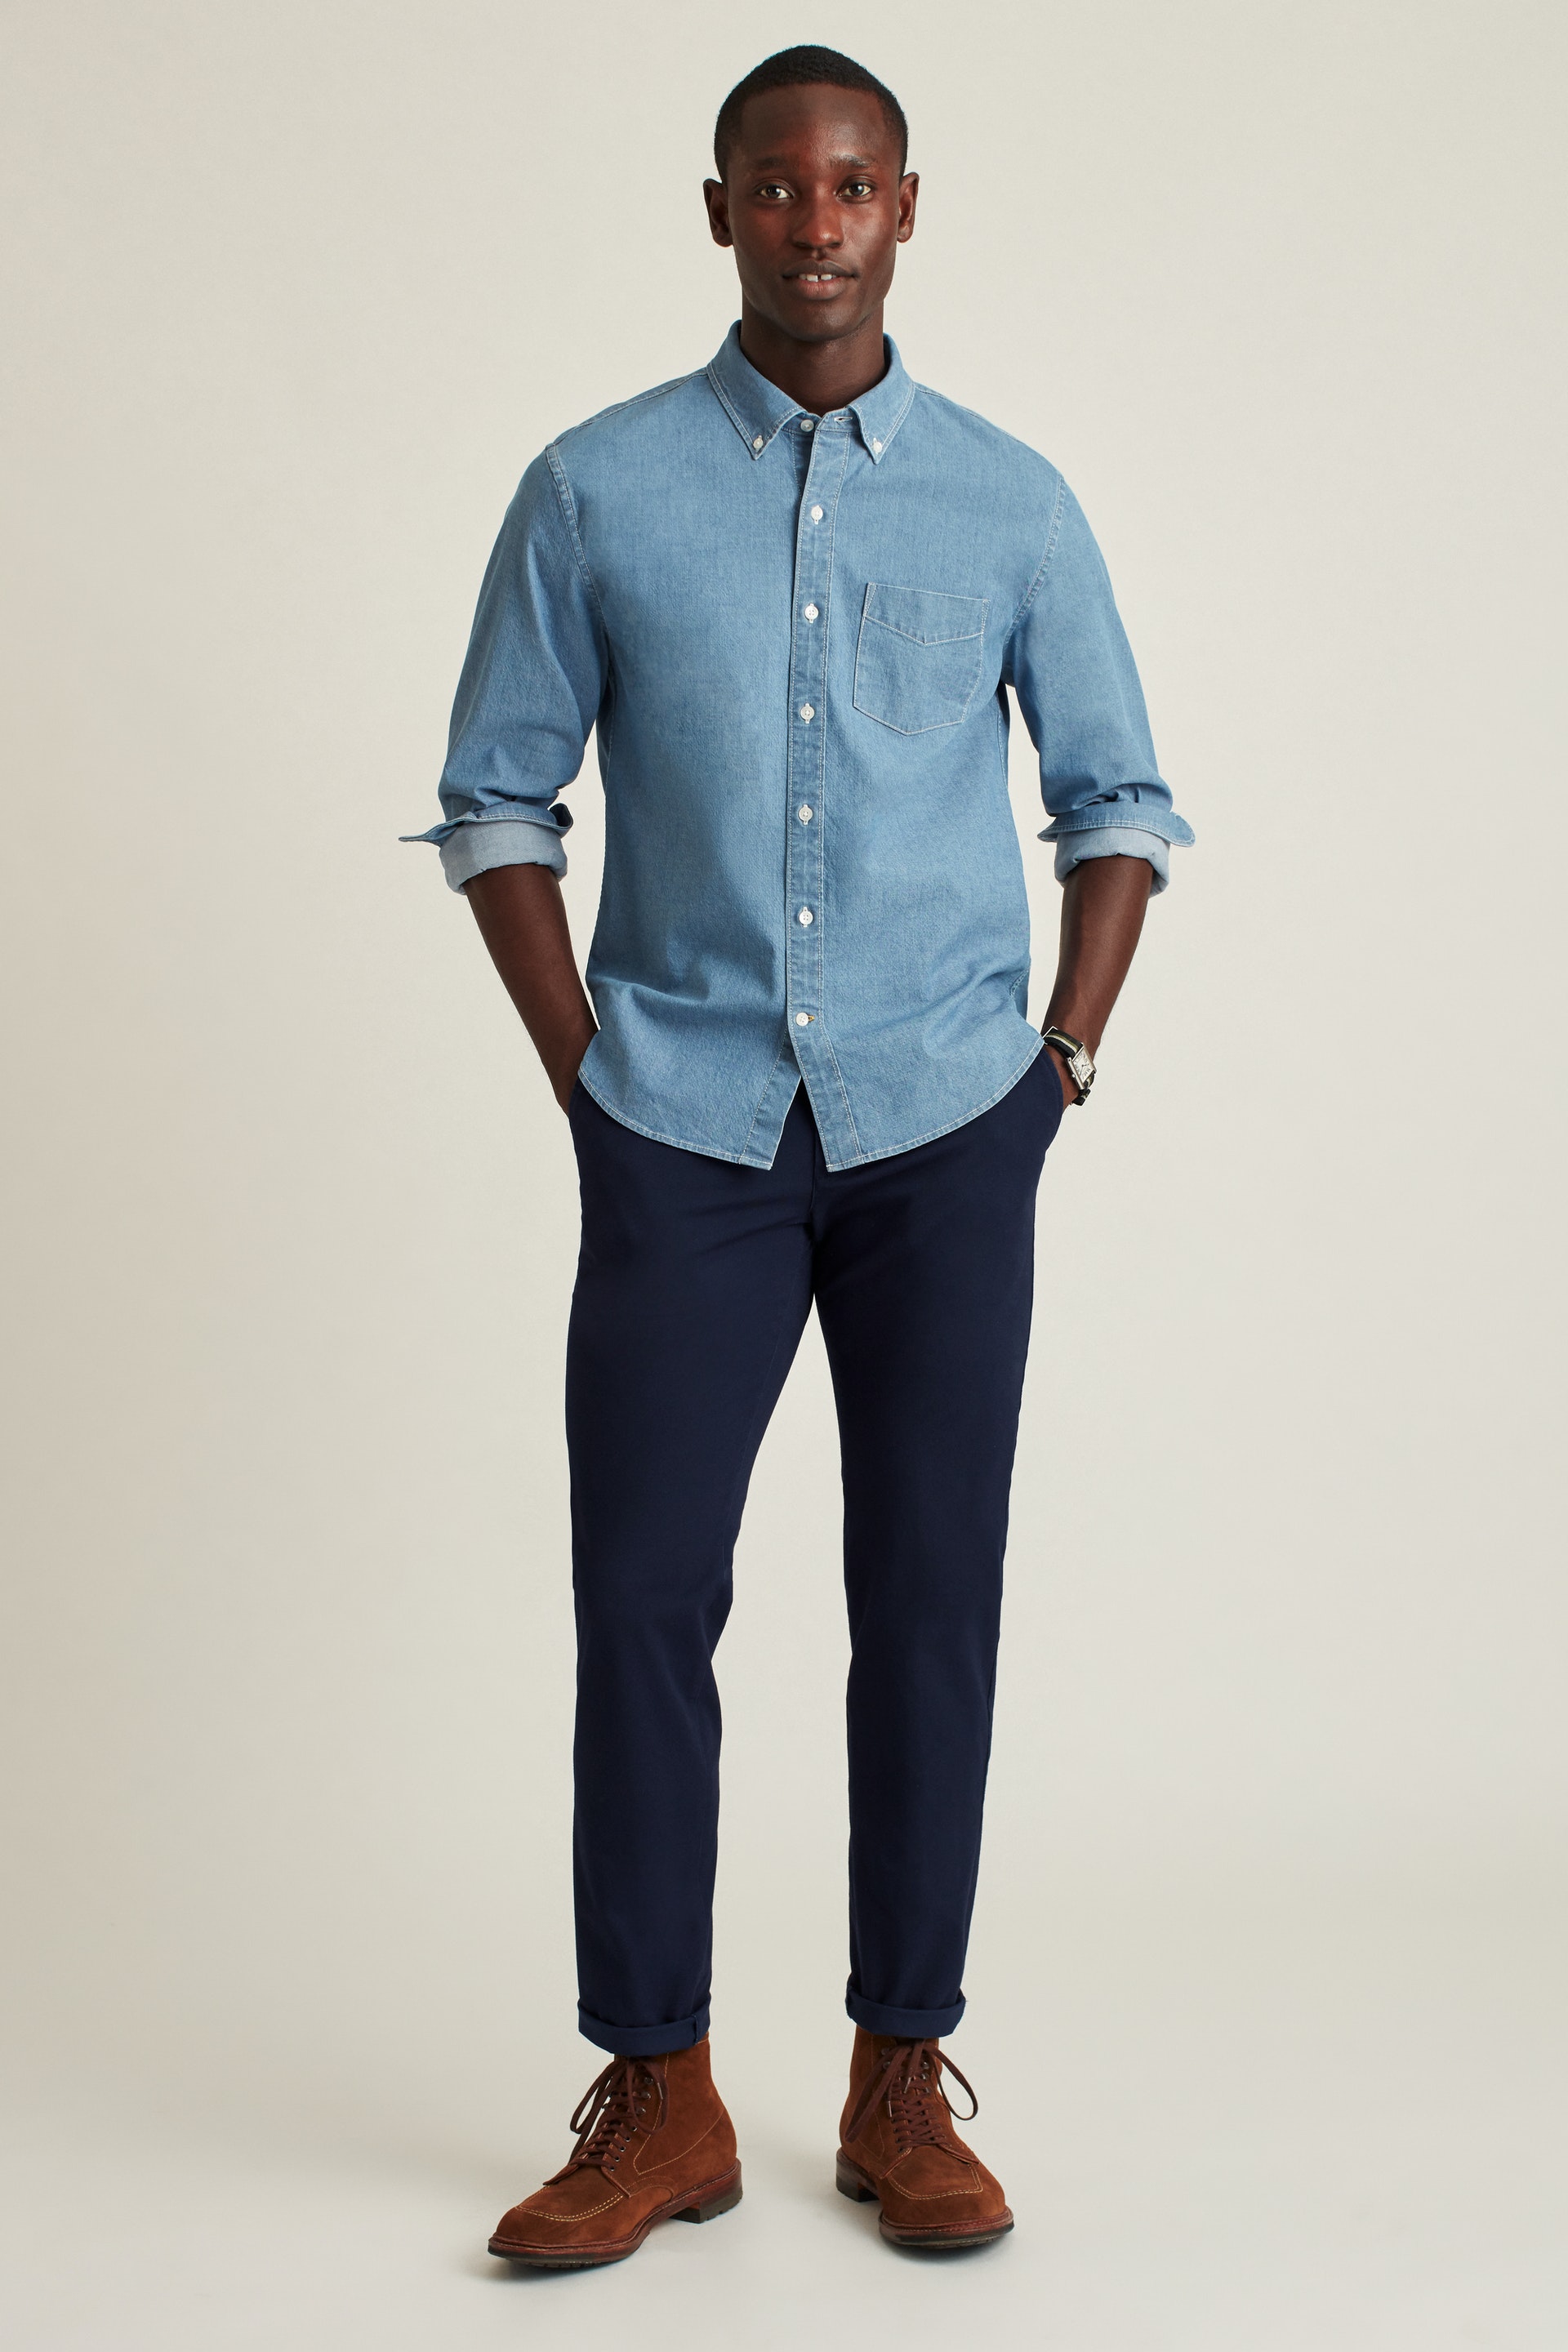 14 Best Chinos For Men 2022  The Sun UK  The Sun